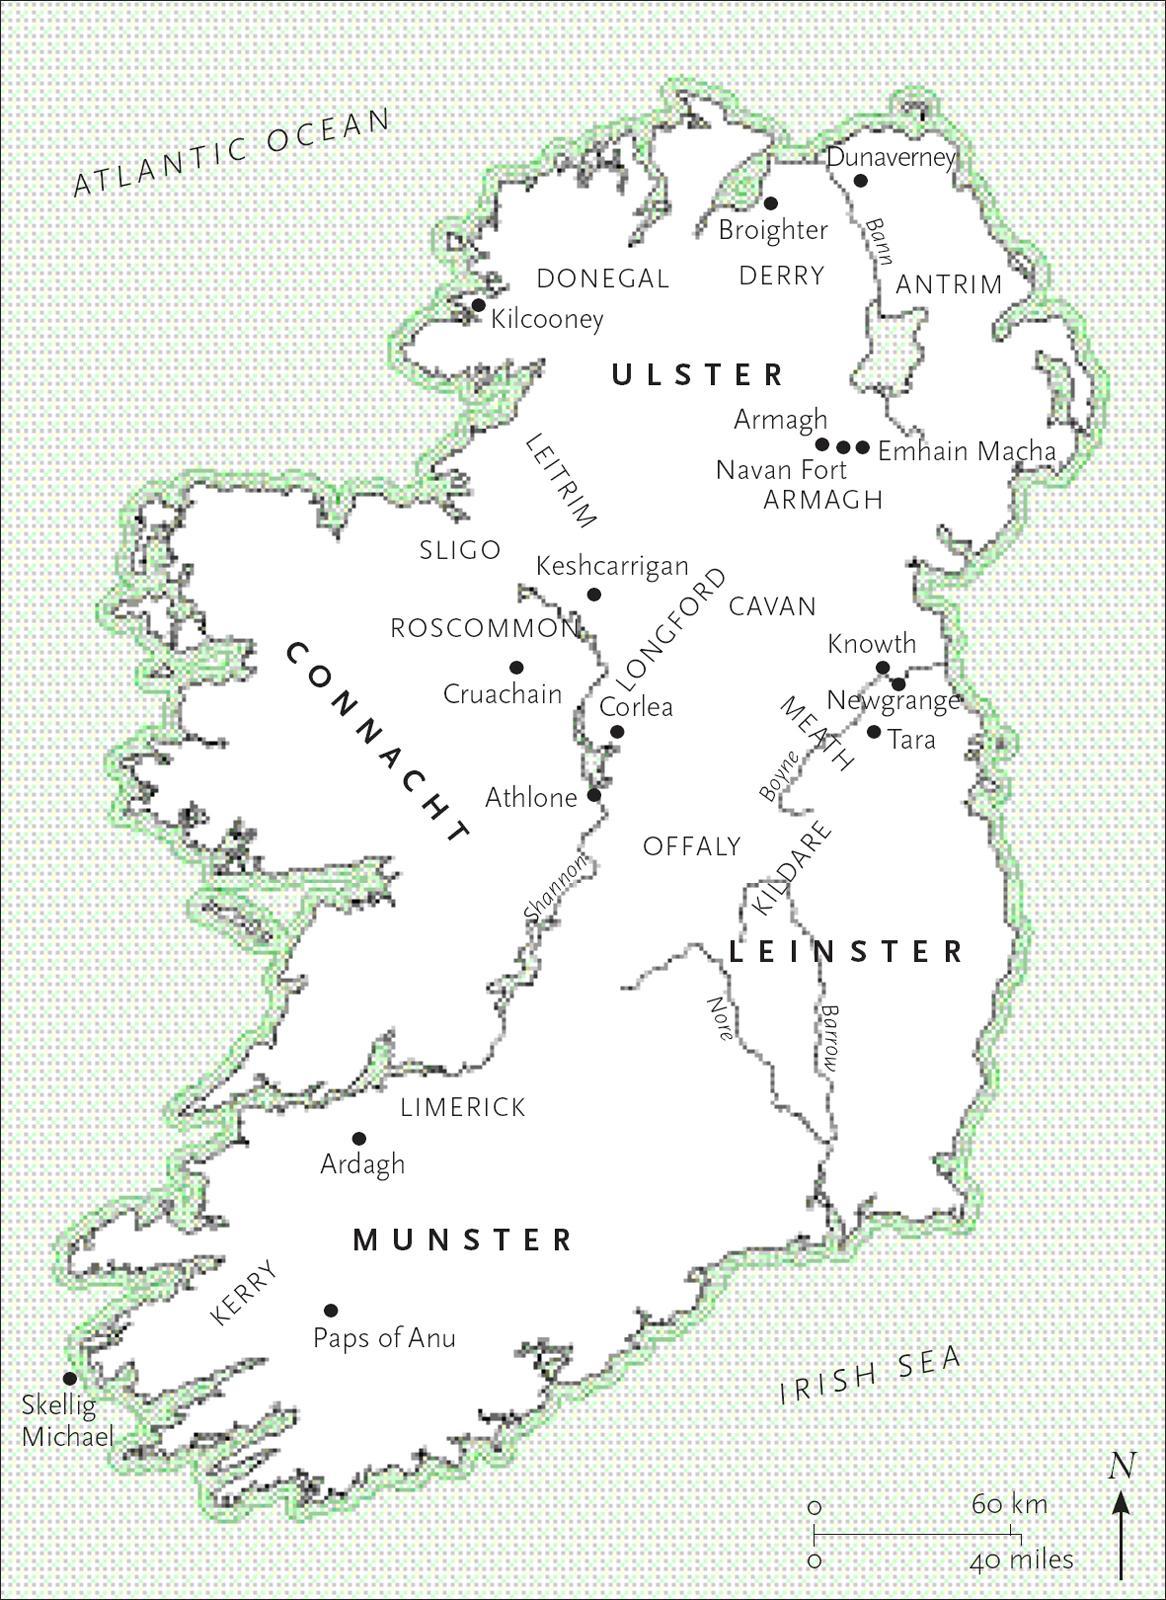 Map of Ireland with regions and sites mentioned in the text Martin Lubikowski - photo 5